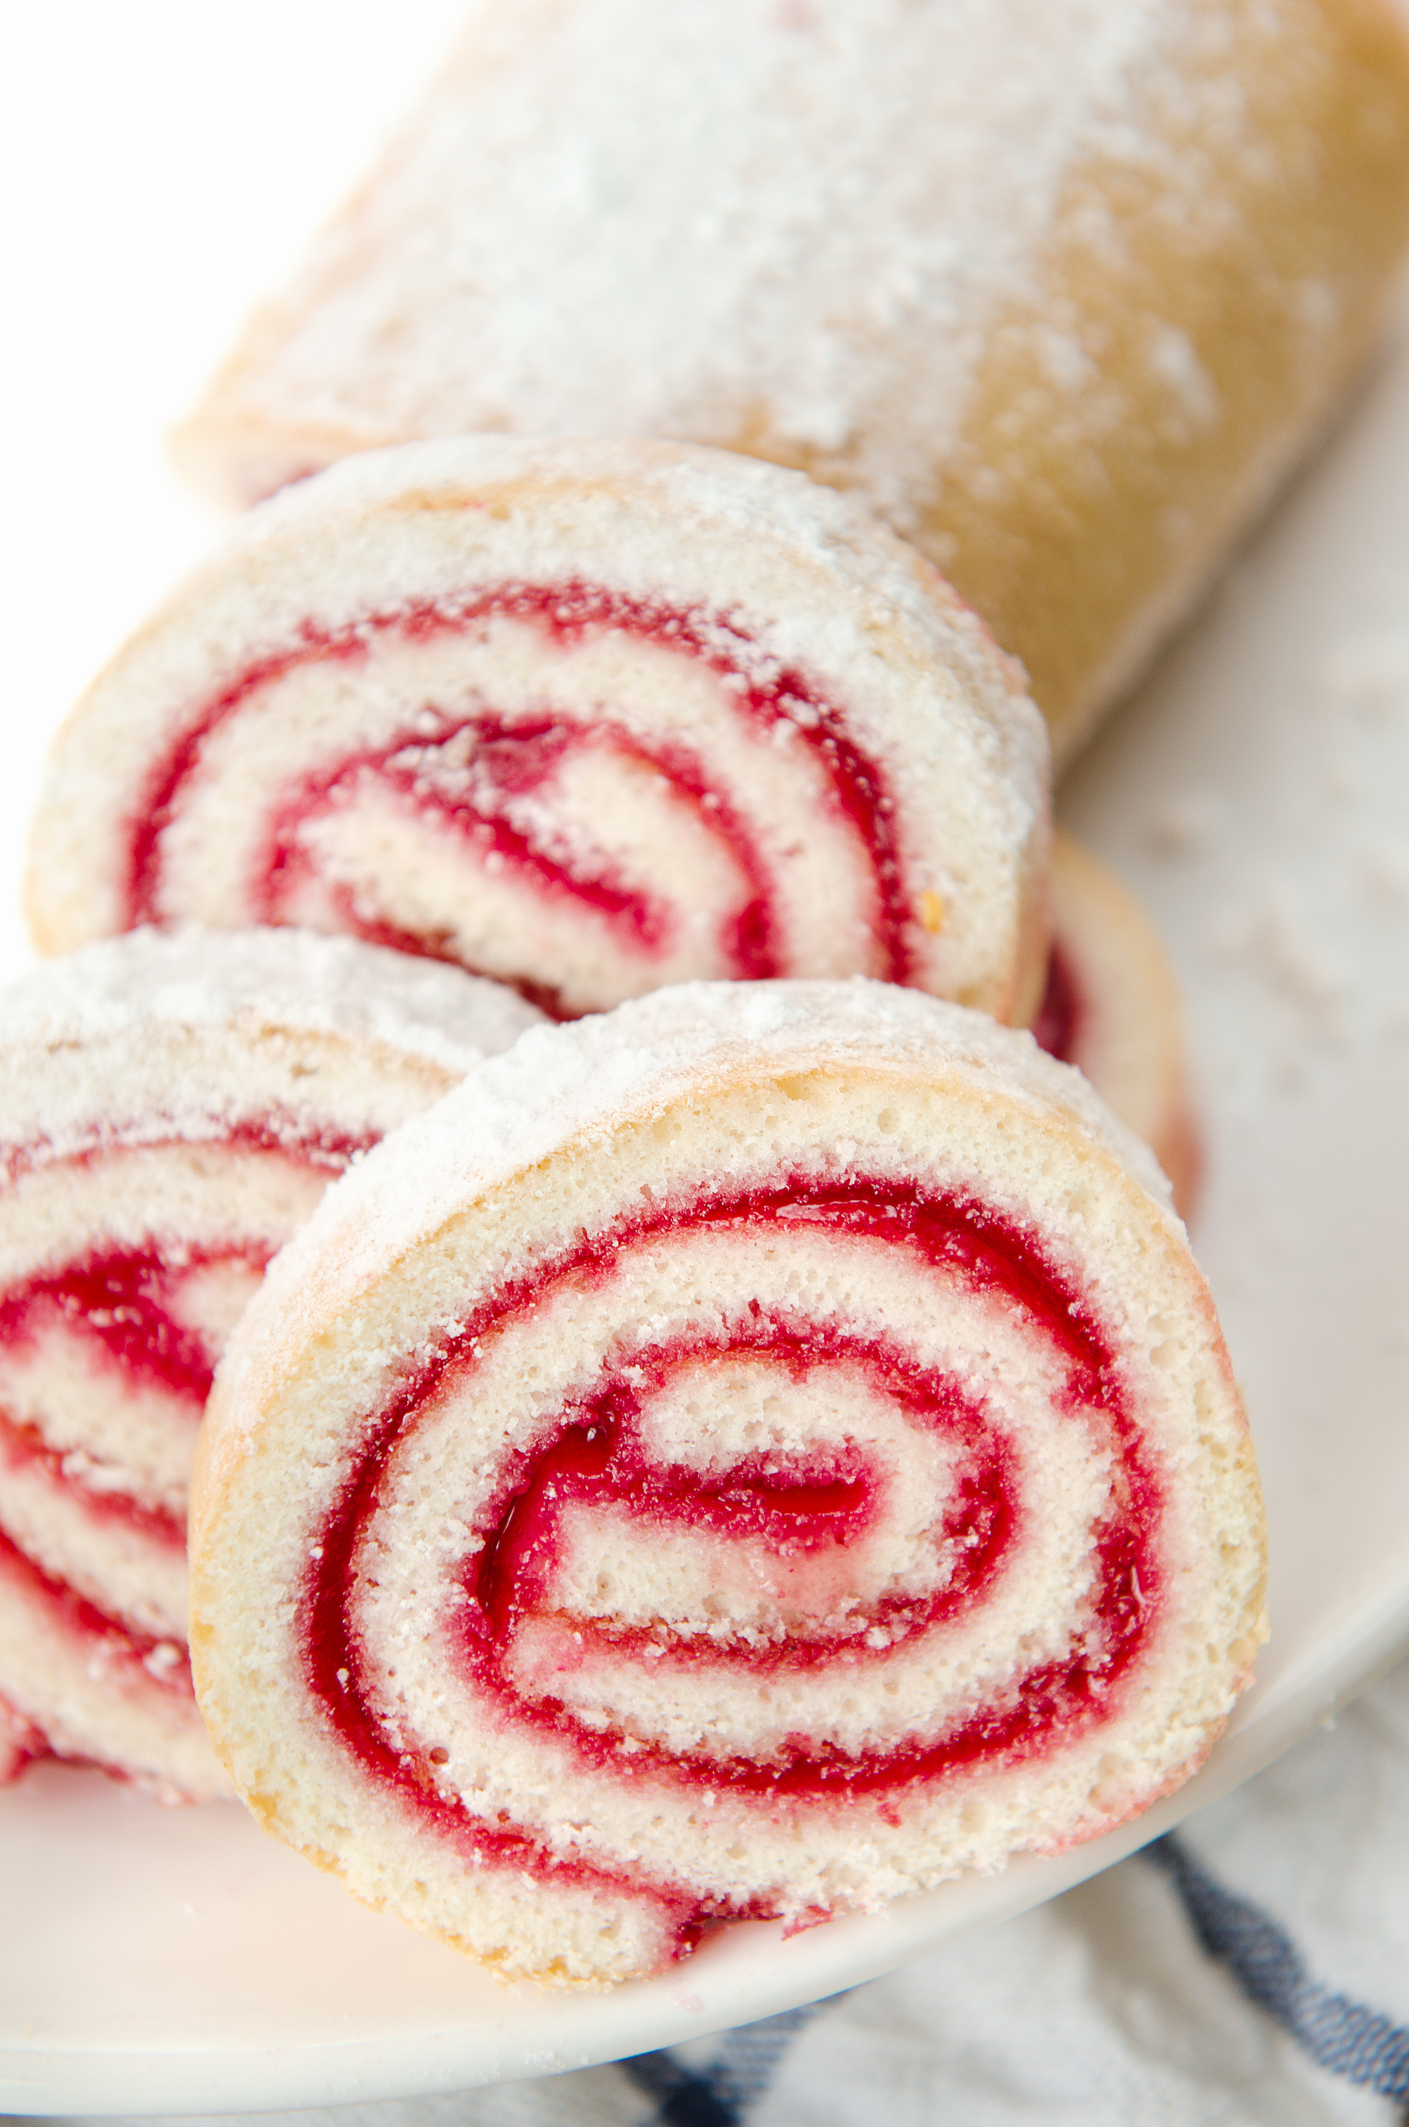 Fresh sweet roll with strawberry jam and powdered sugar on a plate and a white towel